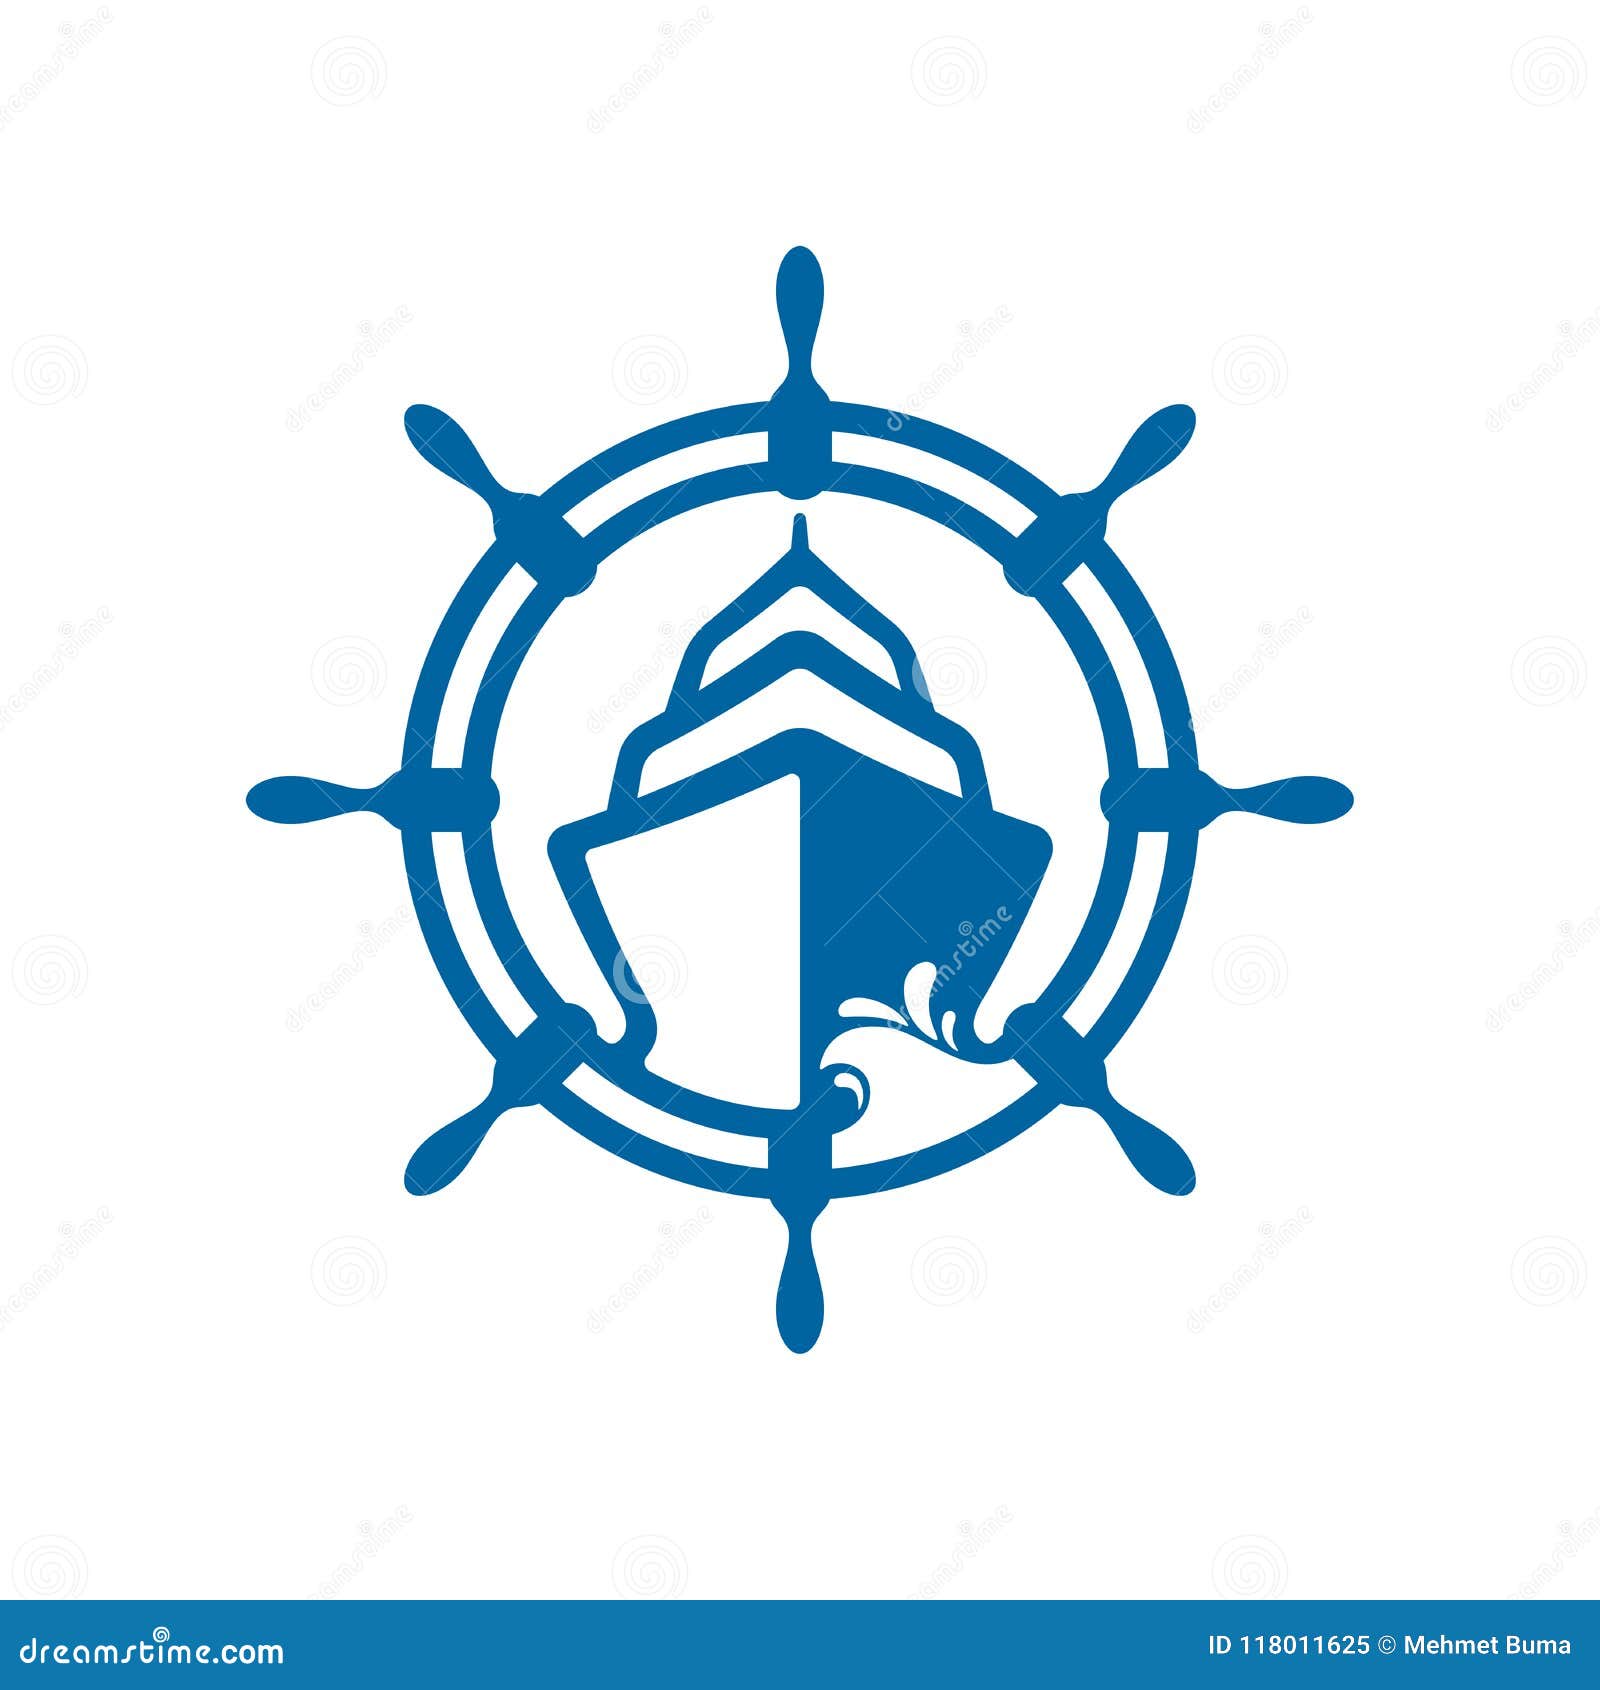 Boat and Ship Wheel Icon Design Stock Vector - Illustration of handle ...